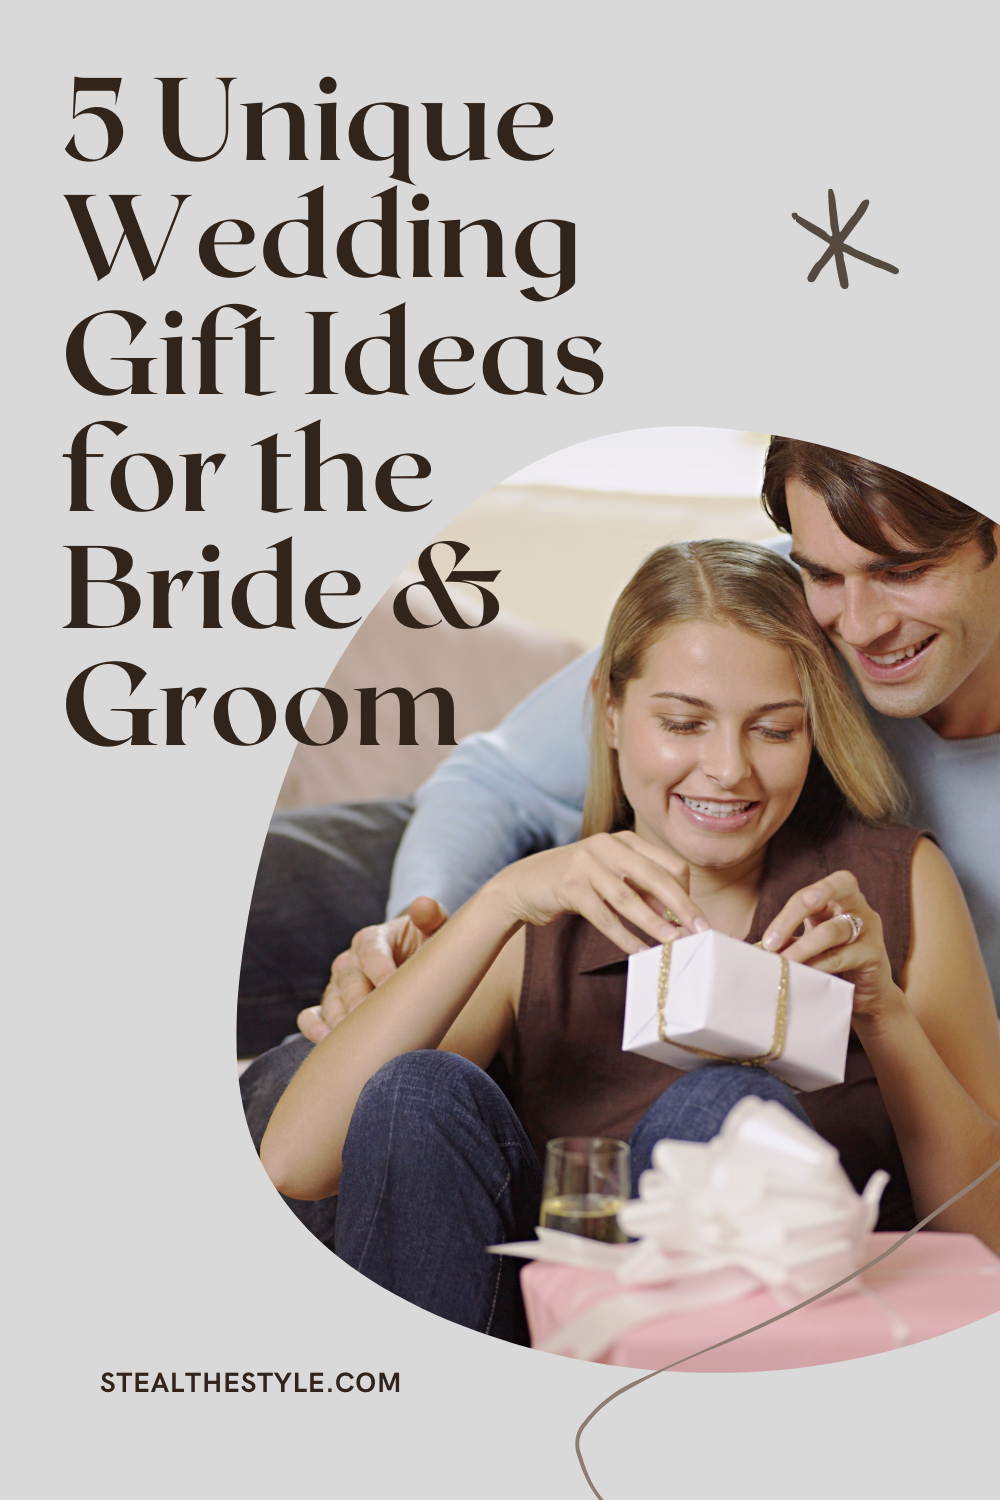 5 Unique Wedding Gift Ideas for Bride and Groom